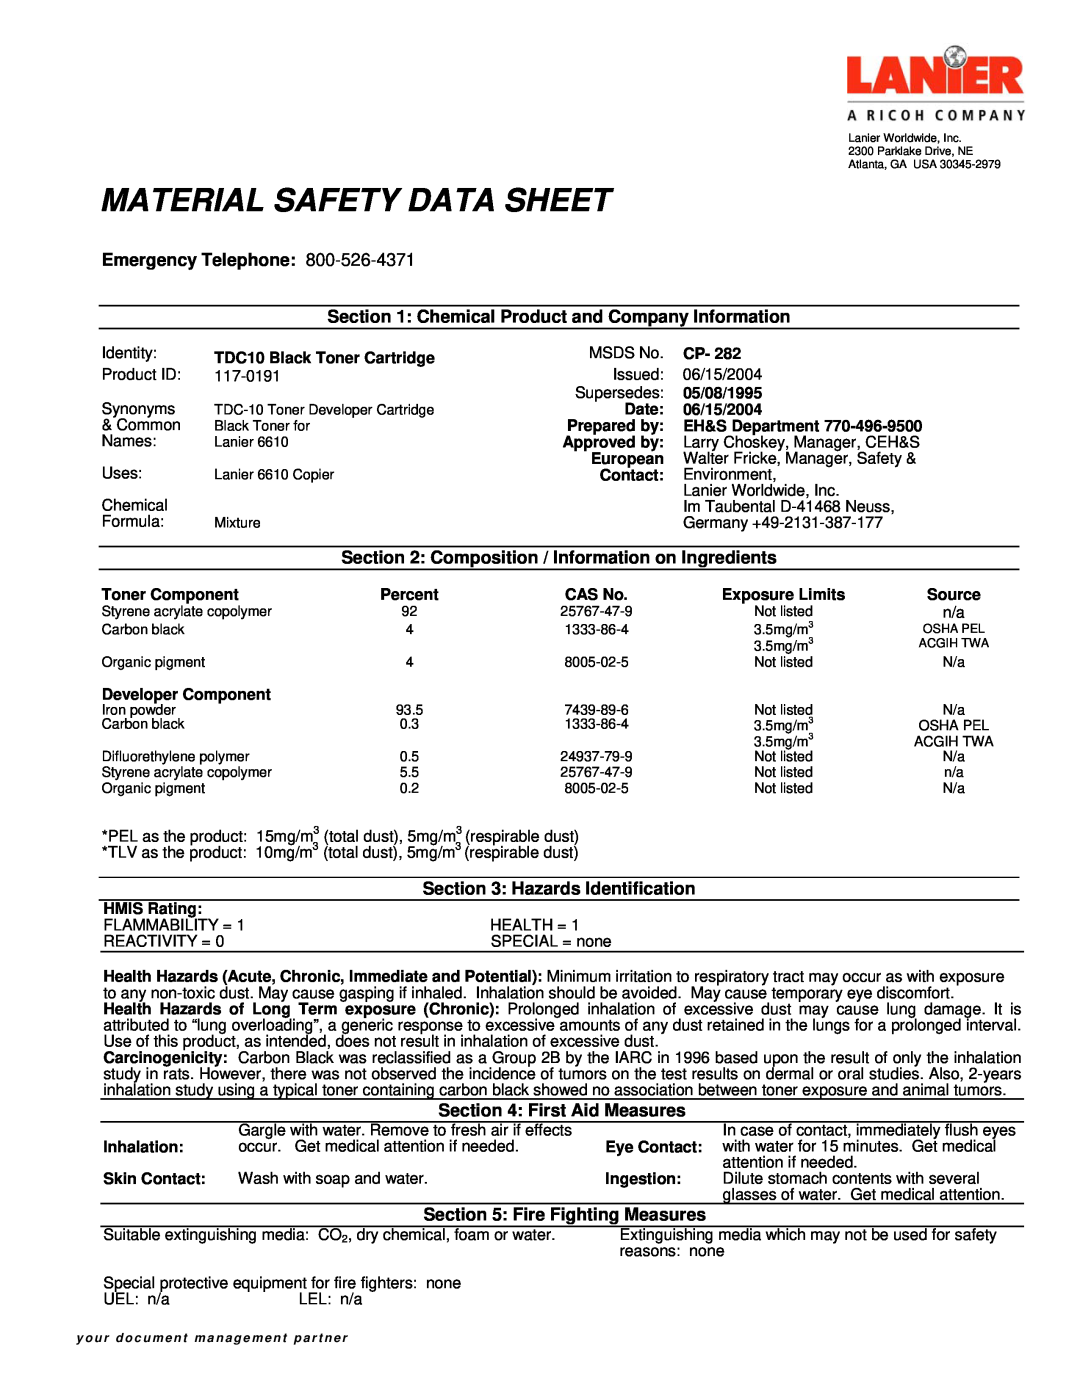 Lanier CP-282 manual Material Safety Data Sheet, Emergency Telephone, Hazards Identification, First Aid Measures 